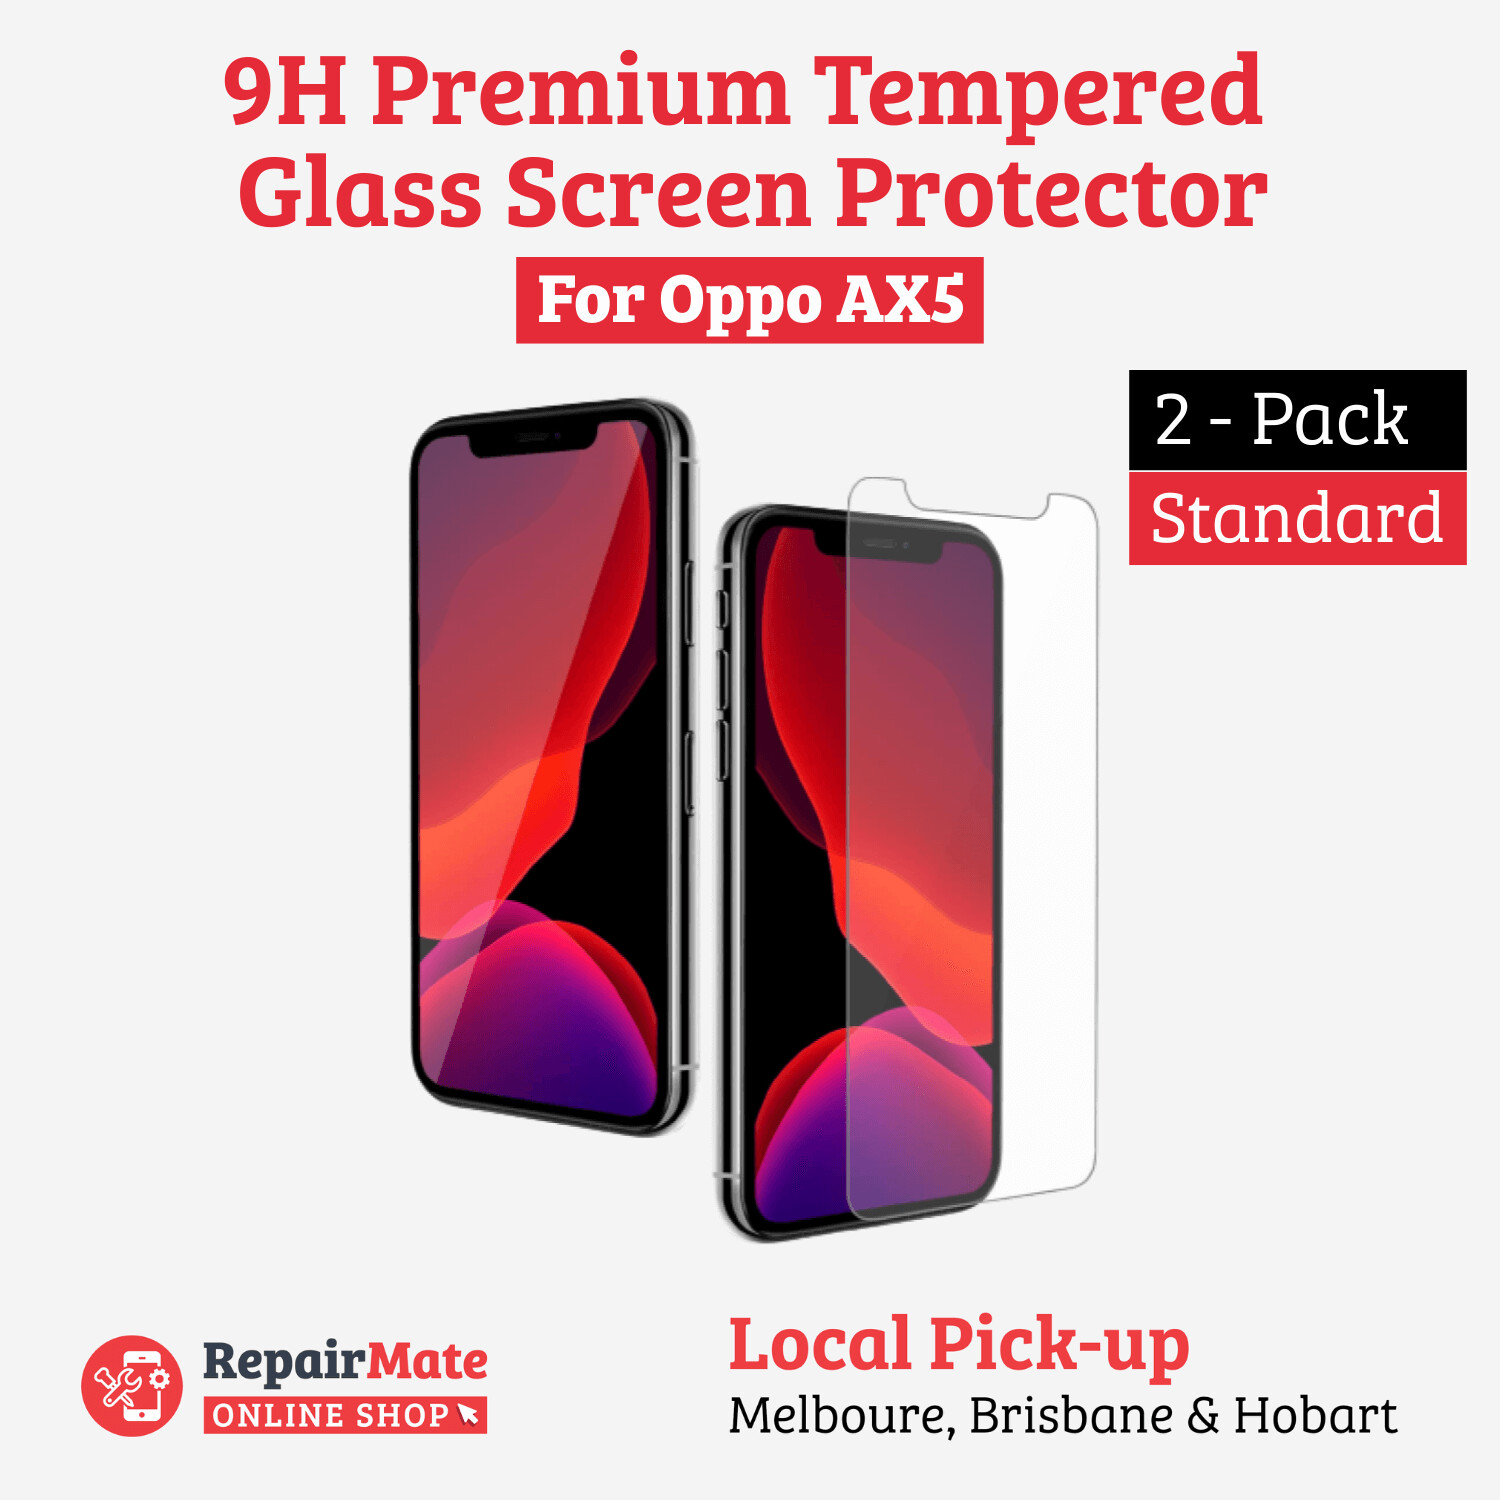 Oppo AX5 9H Premium Tempered Glass Screen Protector [2 Pack]